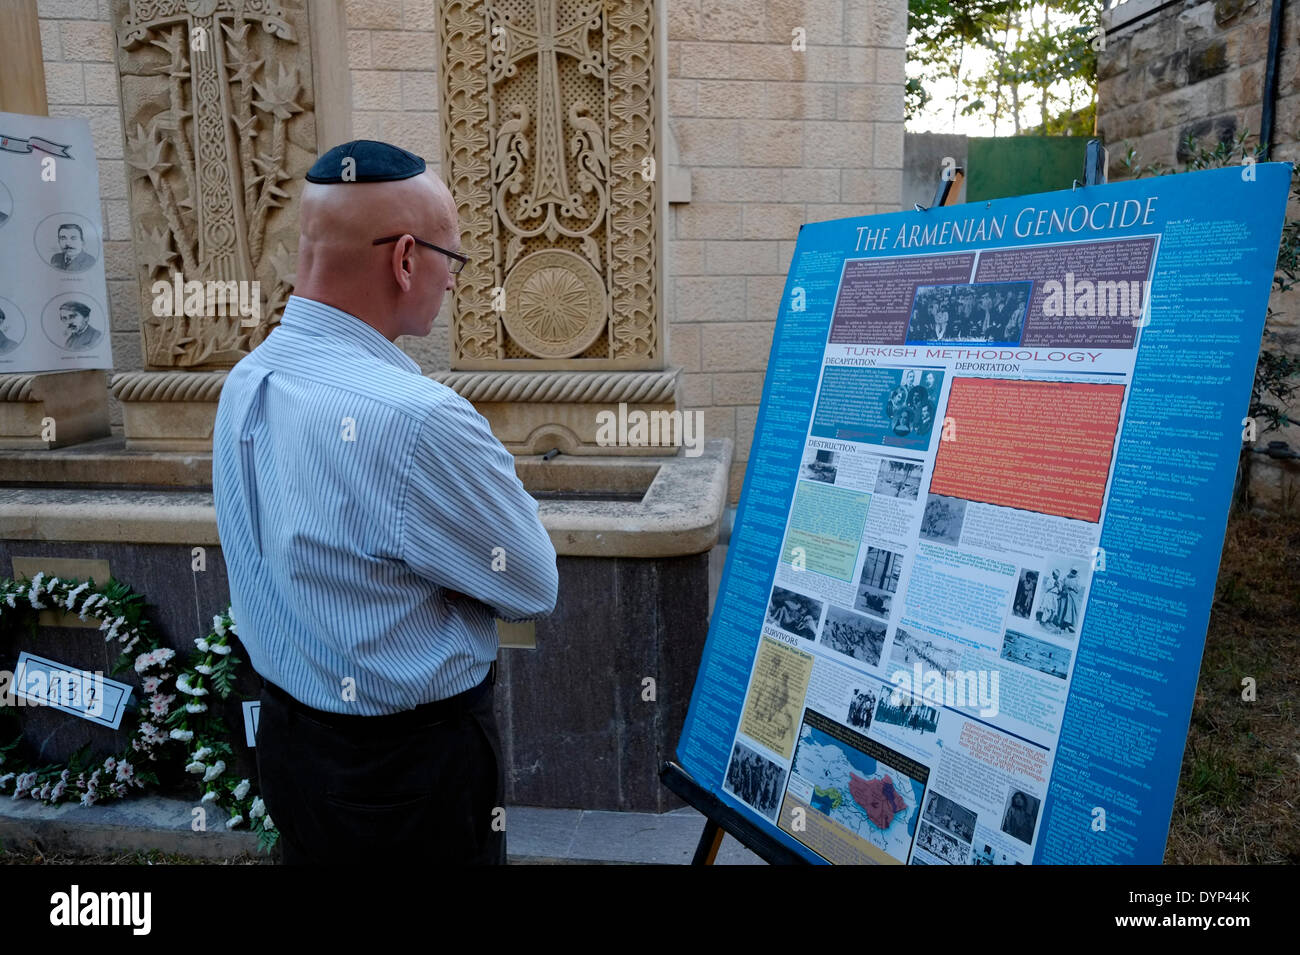 An Israeli religious Jew reads about the Armenian Genocide at the Armenian Genocide memorial on the eve of 99th anniversary of Armenian Genocide at the Armenian Patriarchate in the Armenian quarter Old city East Jerusalem Israel on 23  APRIL 2014. Genocide Remembrance Day or Genocide Memorial day, is observed by Armenians in dispersed communities around the world on April 24 . It is held annually to commemorate the victims of the Armenian Genocide from 1915 to 1923. Stock Photo